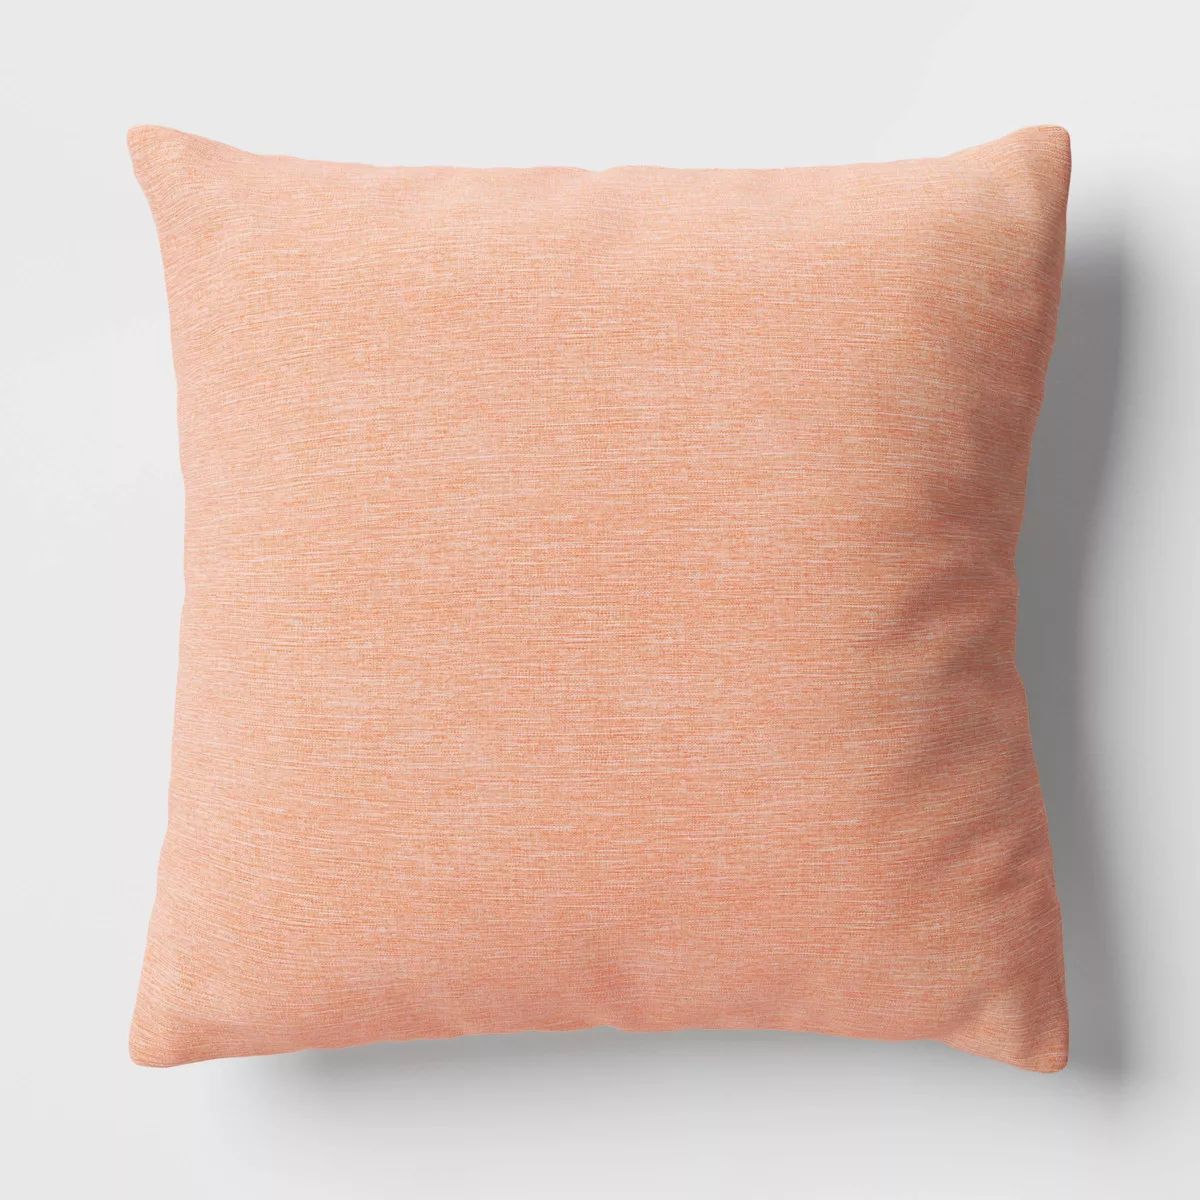 18"x18" Solid Woven Square Outdoor Throw Pillow - Threshold™ | Target